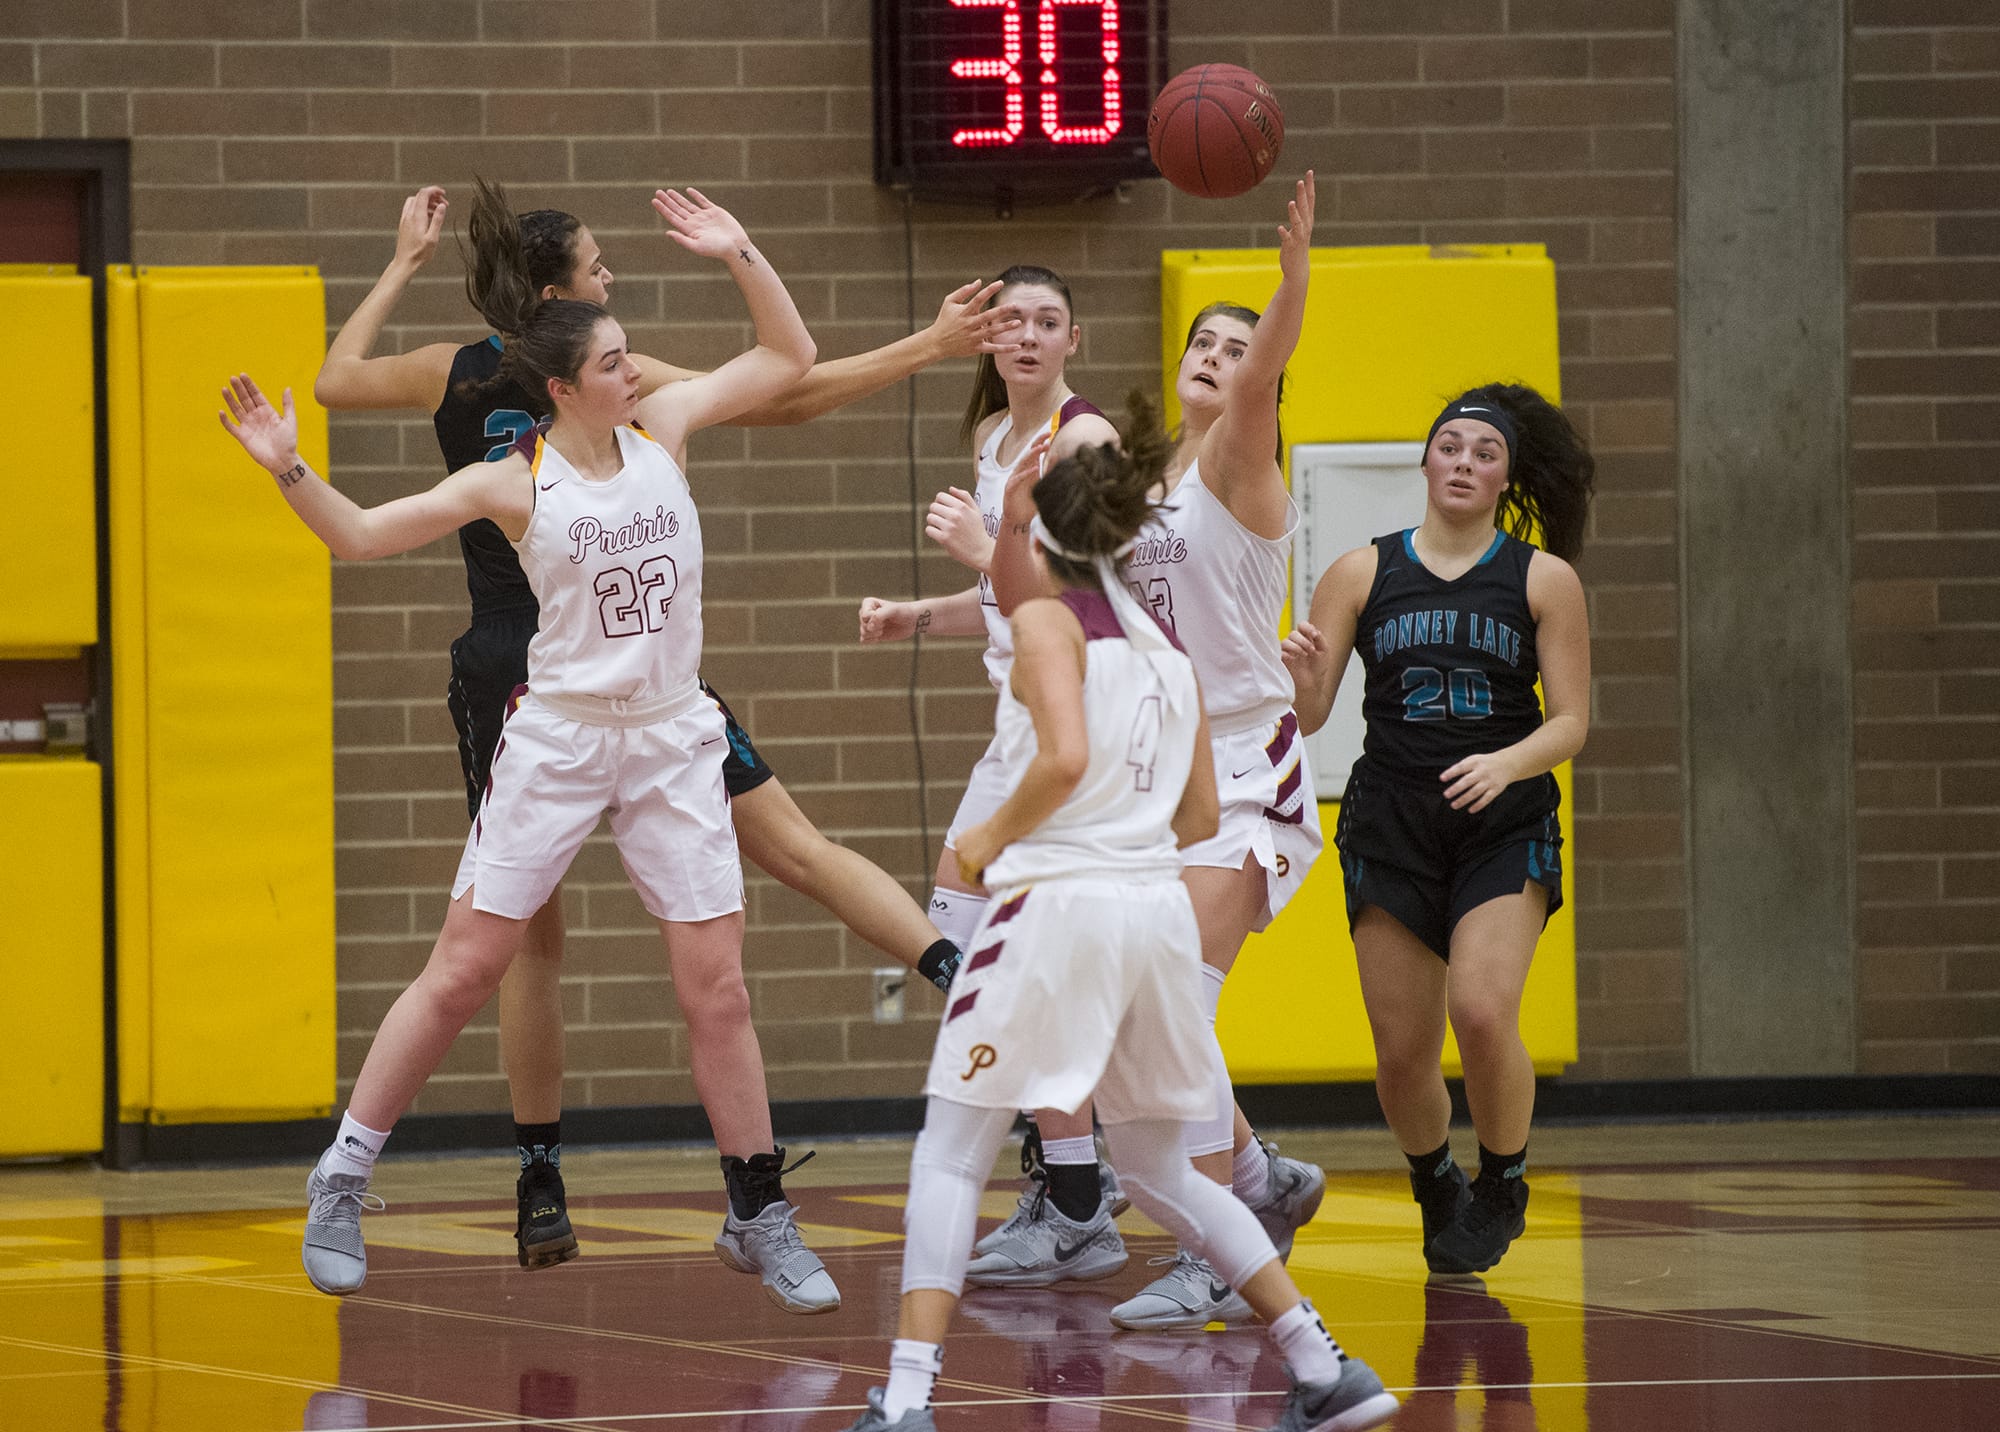 Prairie’s Mallory Williams (13) reaches out to catch the ball during the first round of the 3A bi-district girls basketball tournament against Bonney Lake at Prairie High School, Wednesday February 7, 2018.